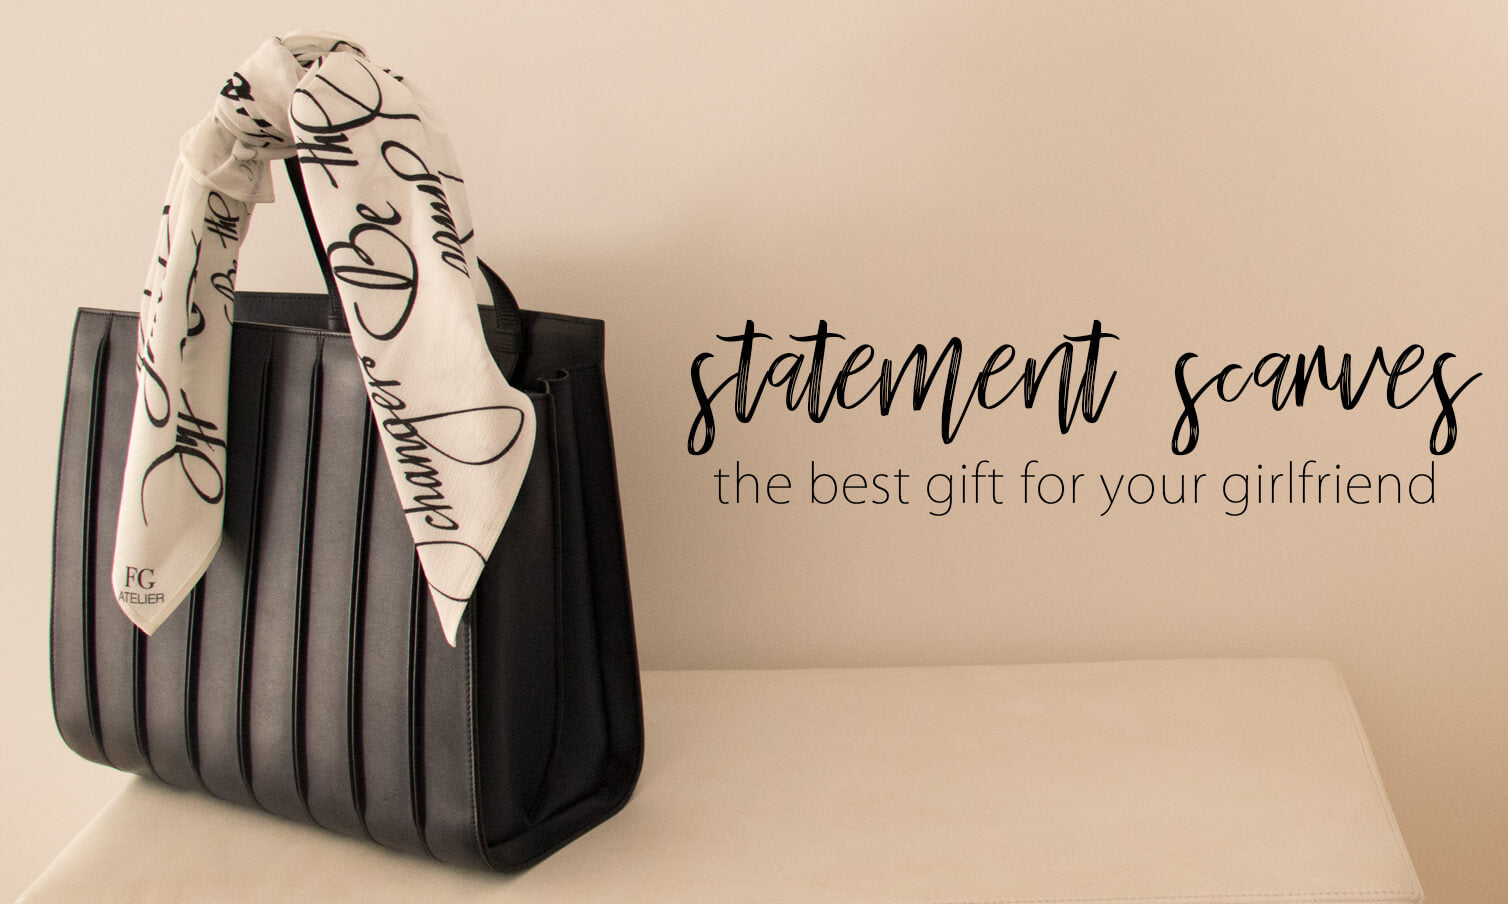 Statement scarves the best gift for your girlfriend